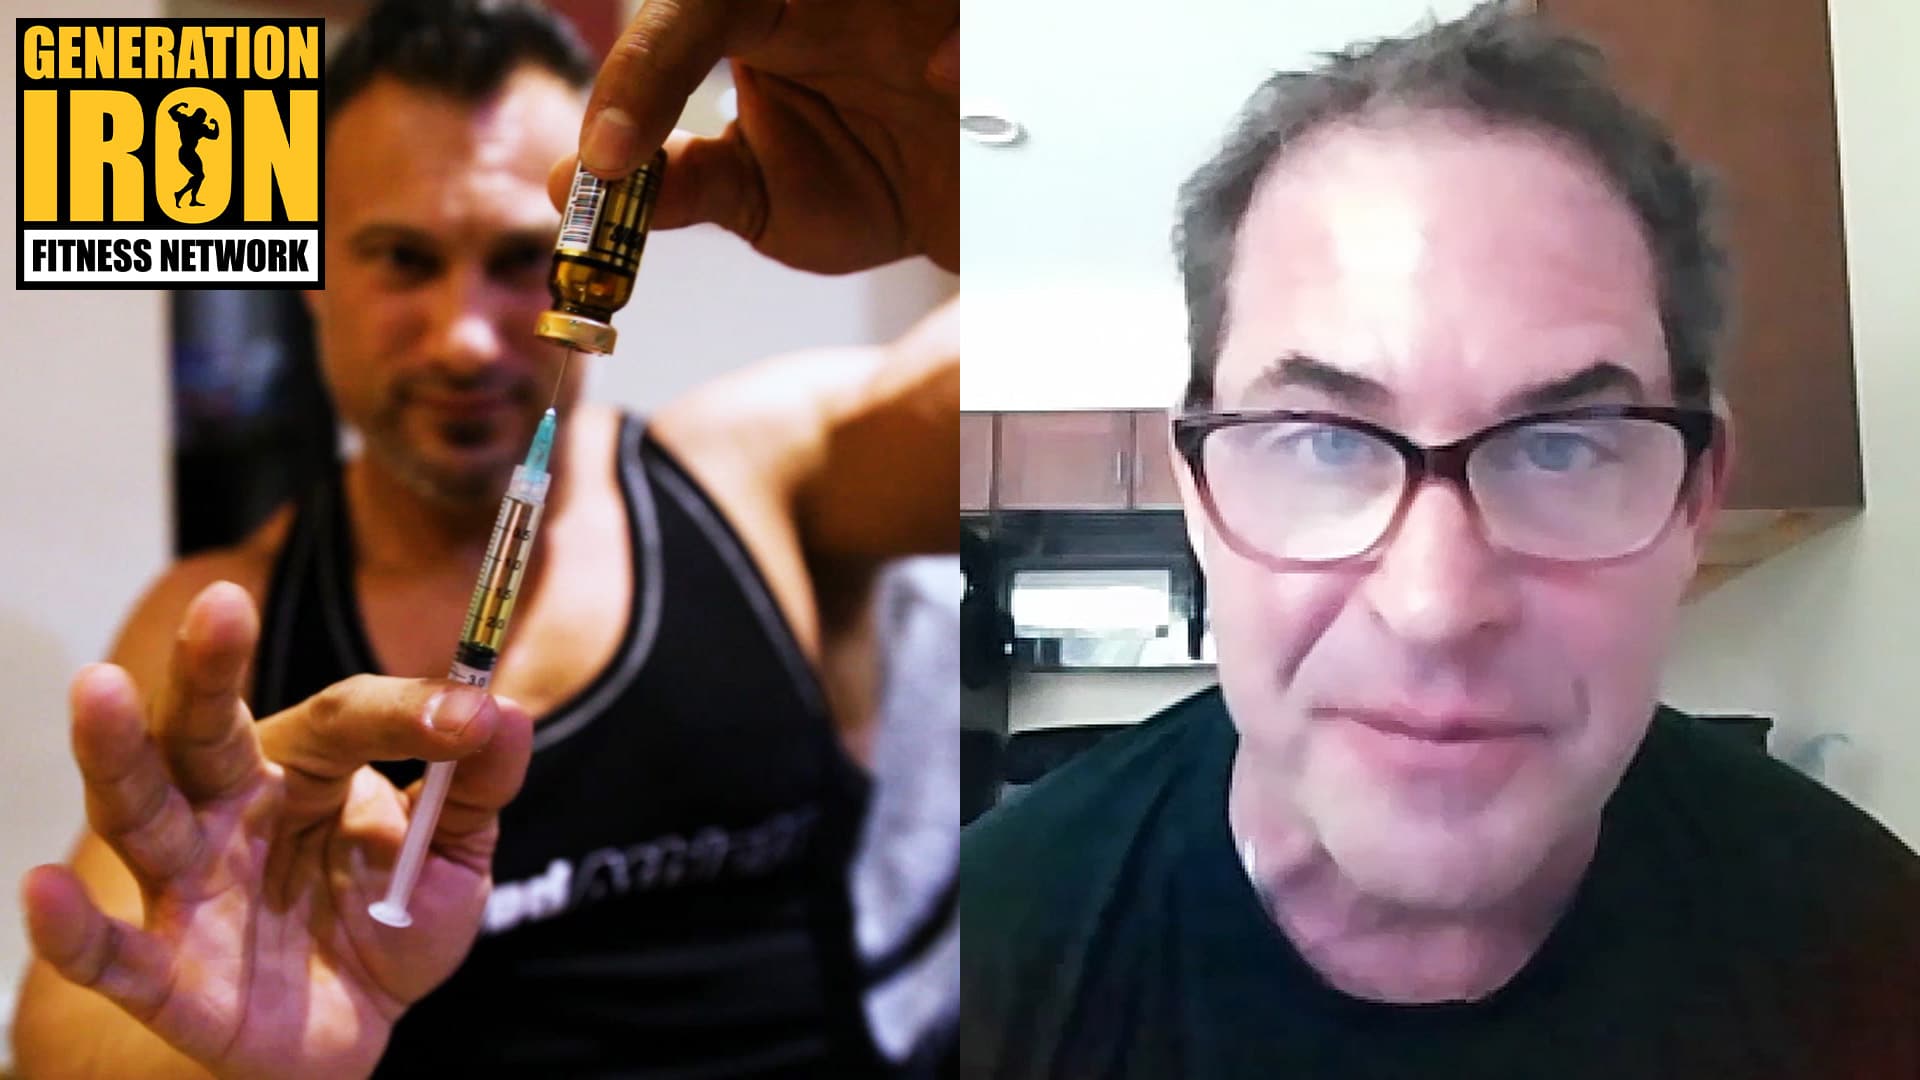 INTERVIEW: The Anabolic Doc Wants To Debate Tony Huge & Debunk His Steroid Claims